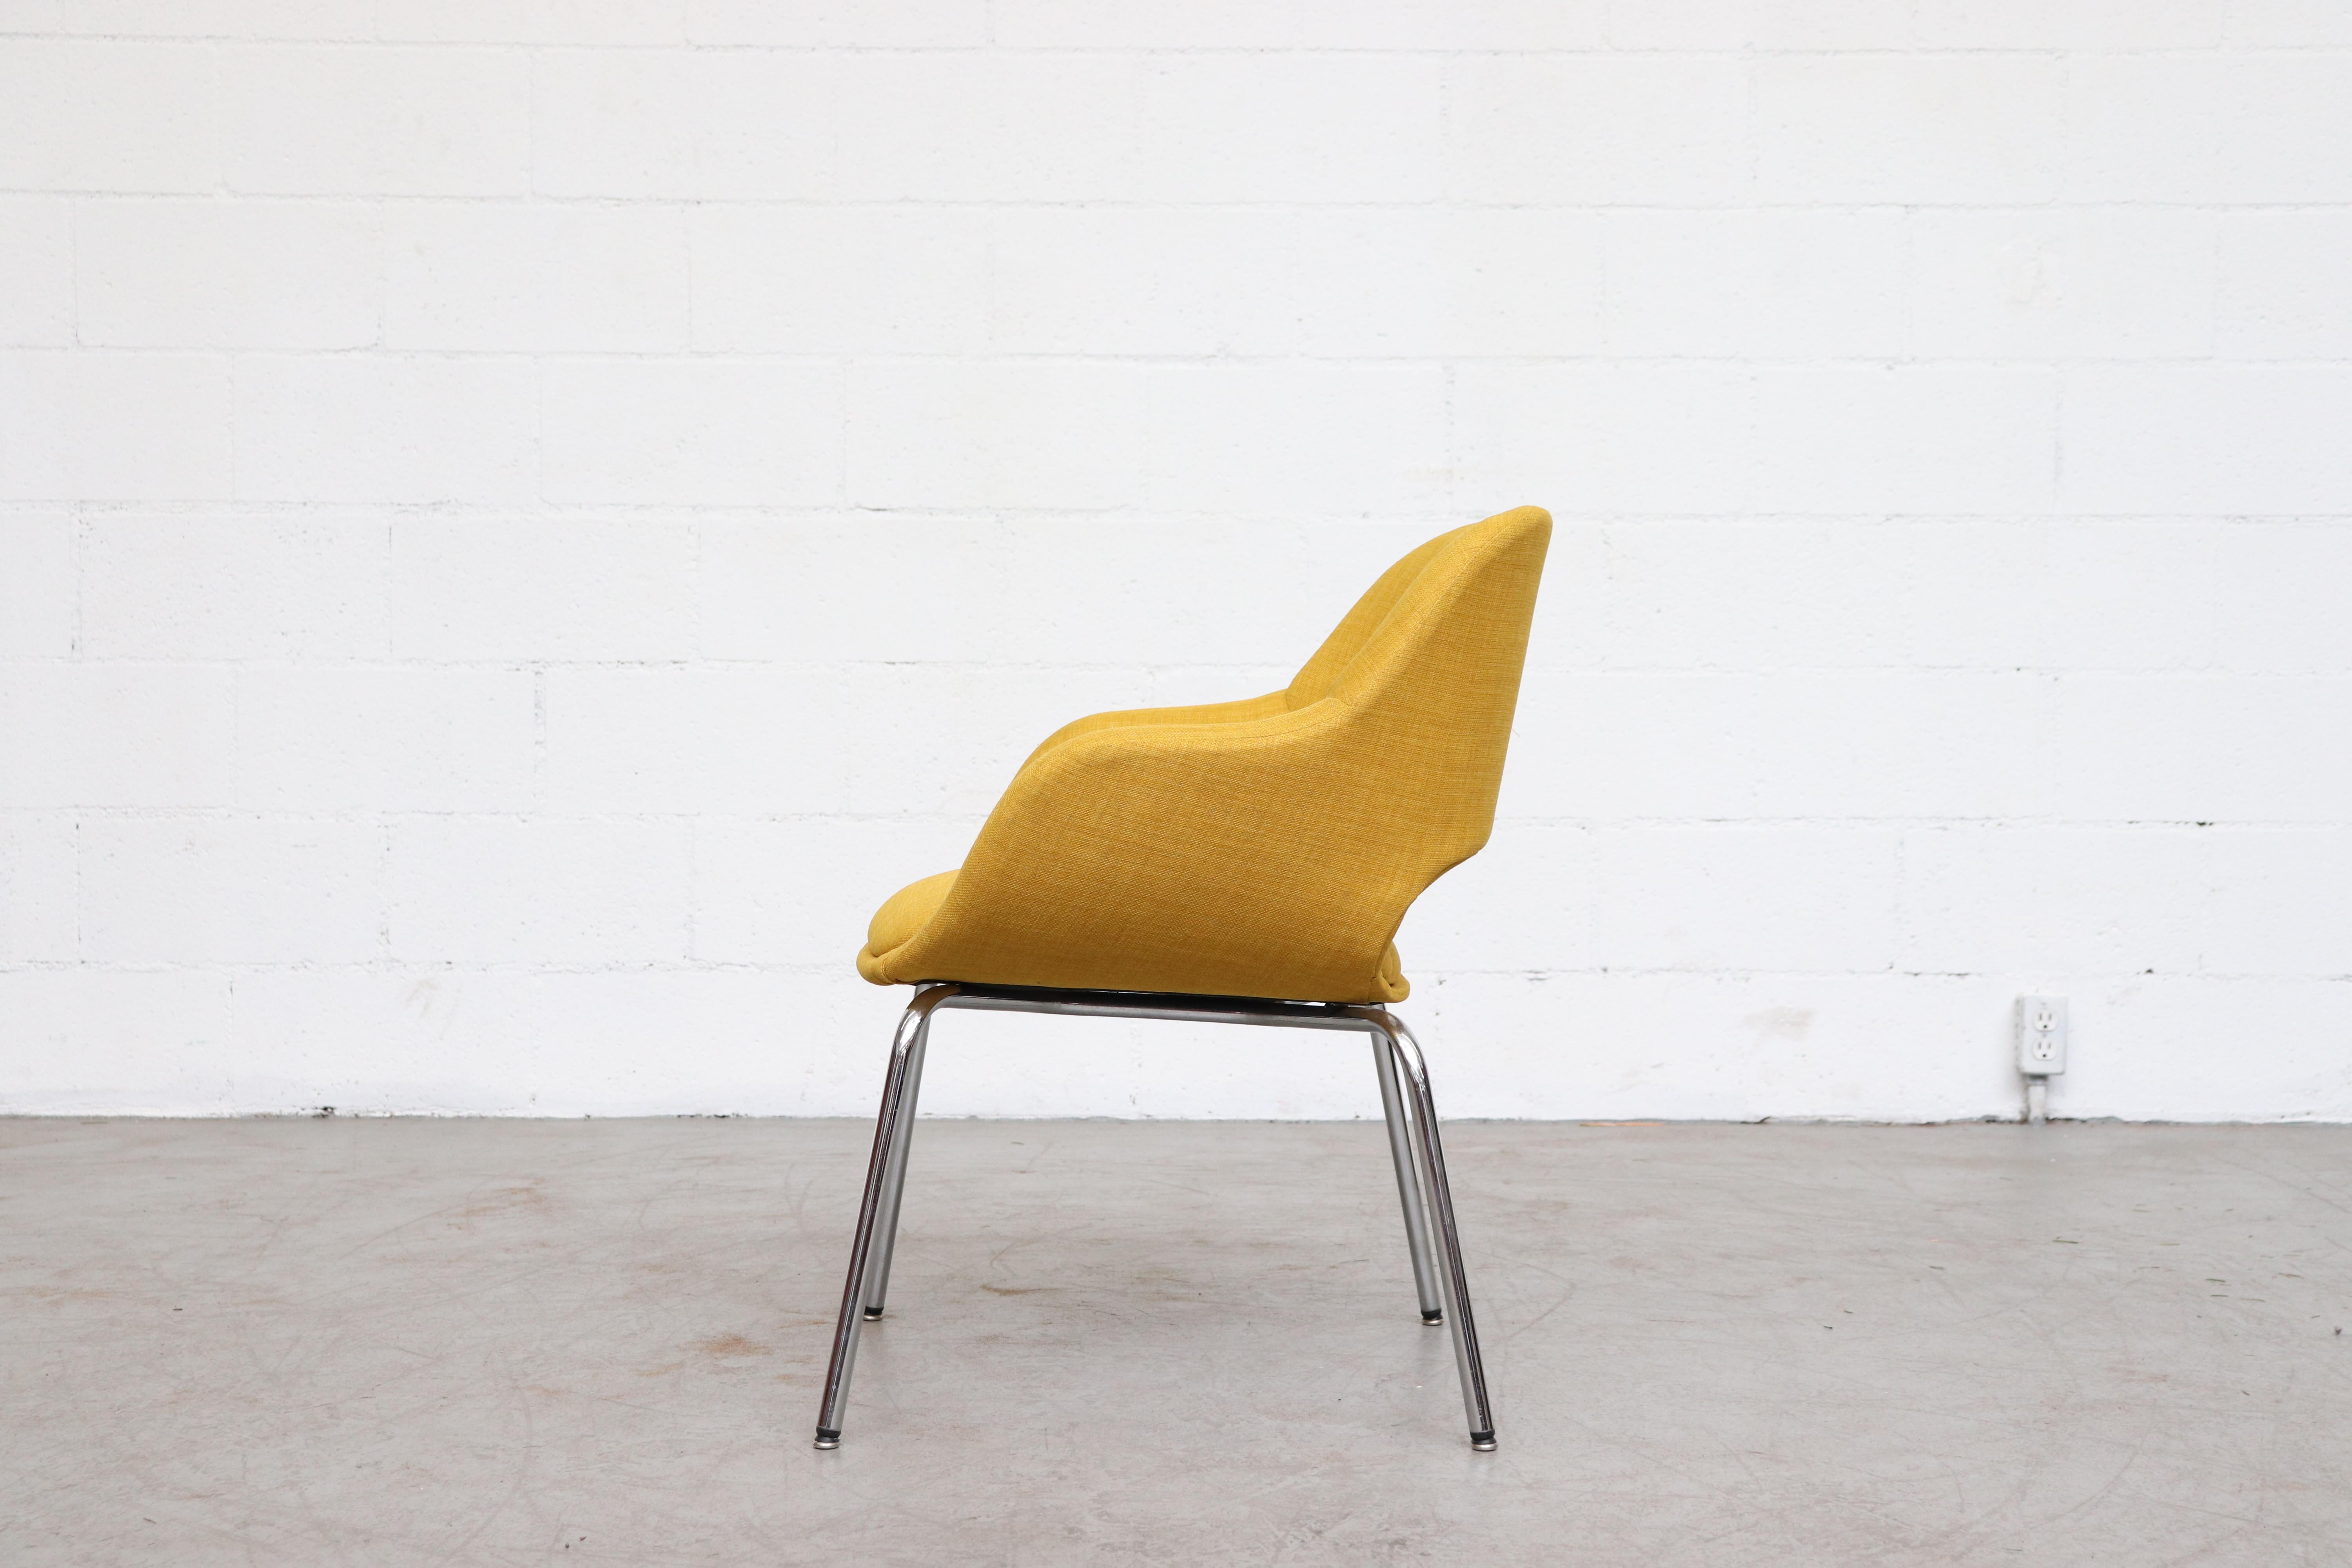 Saarinen style armchair, newly upholstered in sunshine yellow fabric. Attributed to AP Originals by Hein Salomans, Netherlands, 1970. Lovely cut-out back and curved chrome legs. Frame in original condition with some signs of wear consistent with